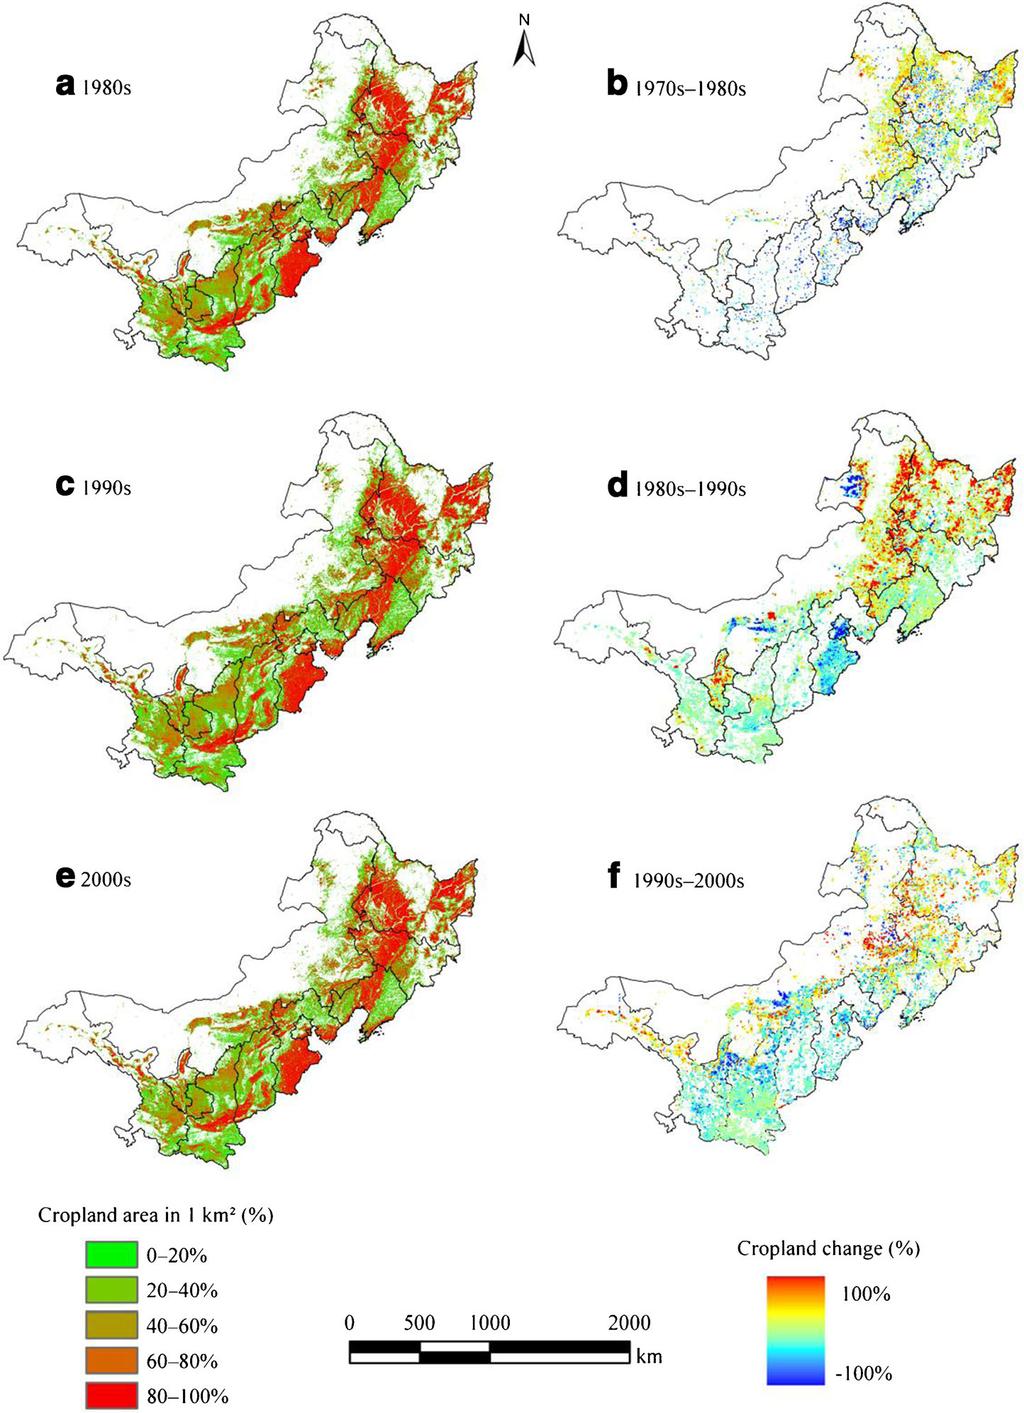 Fig. 1 Spatial distributions of cropland in the a) 1980s, c) 1990s and e) 2000s, and cropland changes from b)the 1970s to the 1980s, d) the 1980s to the 1990s and f) the 1990s to the 2000s in